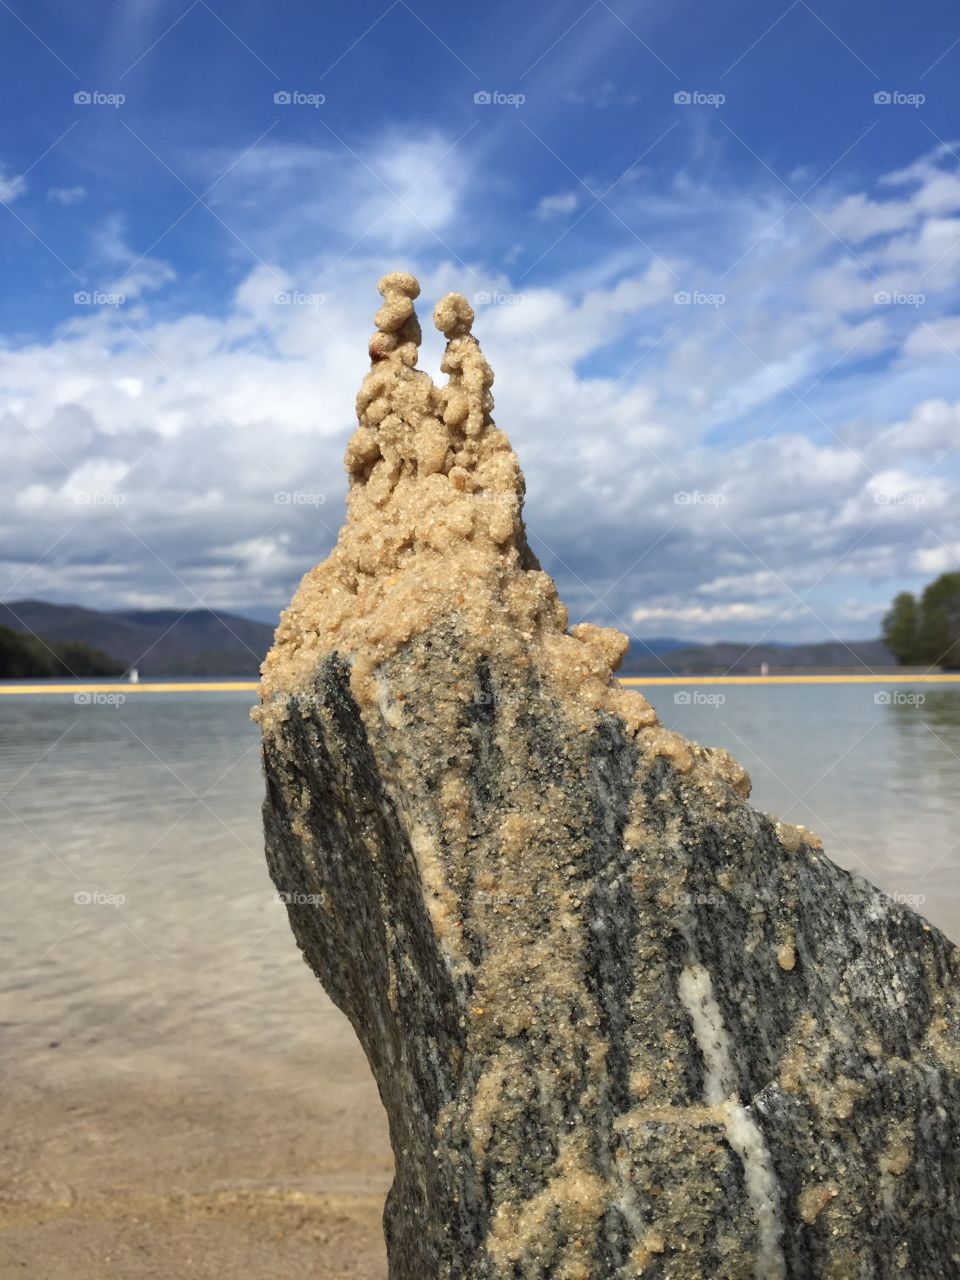 Sandcastle. Sandcastle on a rock in front of a blue lake.